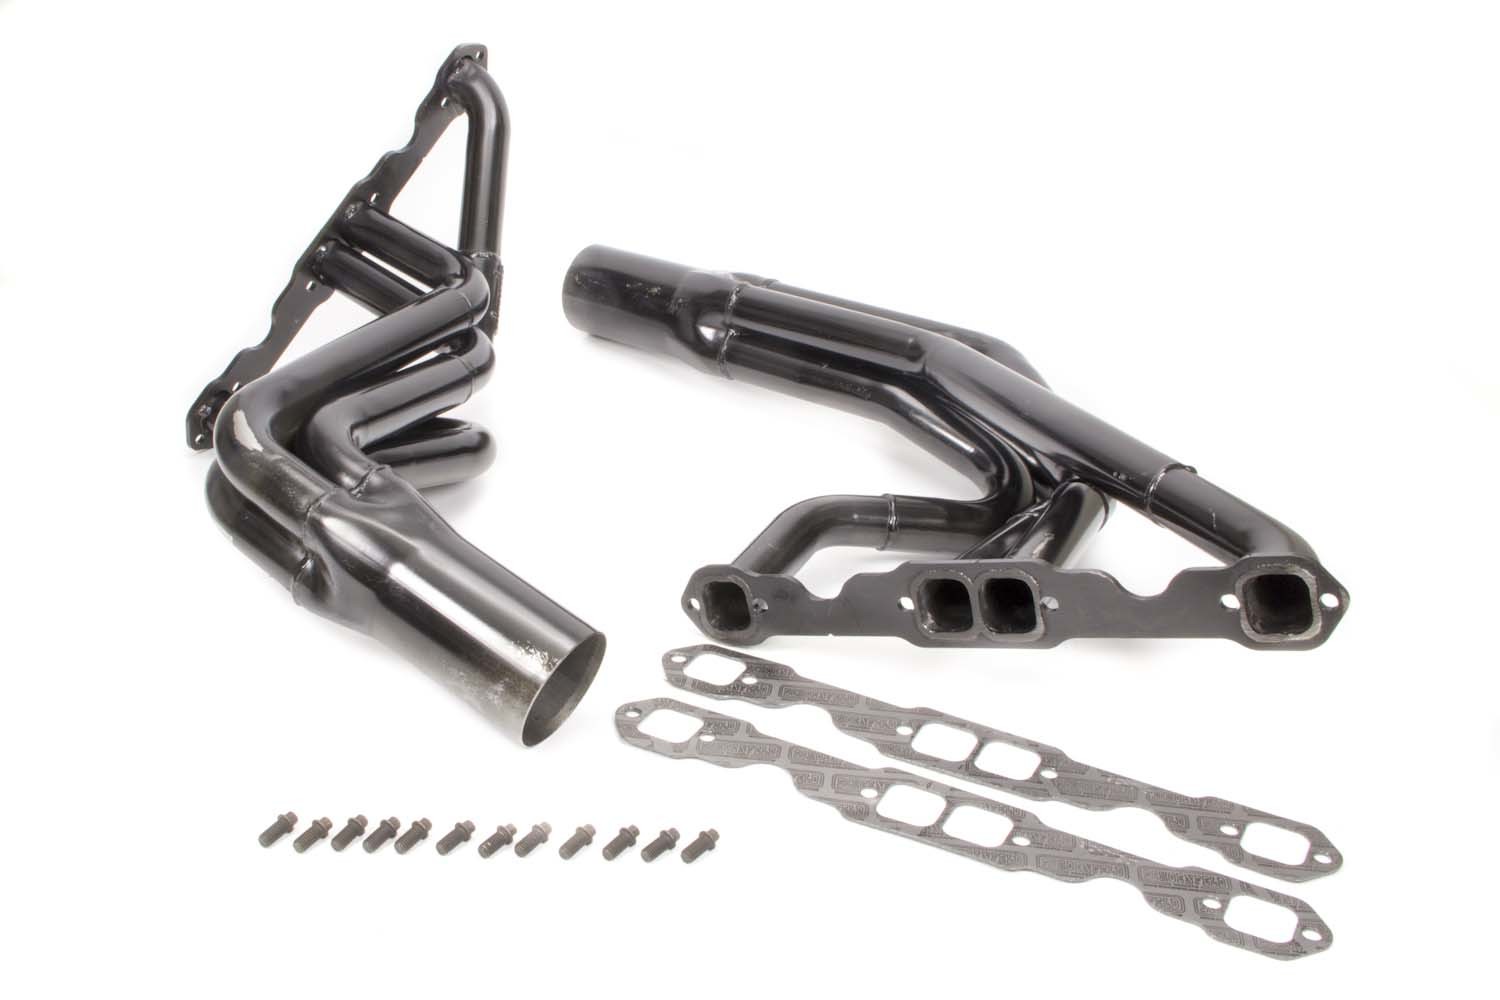 Schoenfeld Headers 141-525LV Headers, Dirt Late Model, 1-5/8 to 1-3/4 in Primary, 3-1/2 in Collector, Steel, Black Paint, Small Block Chevy, Pair